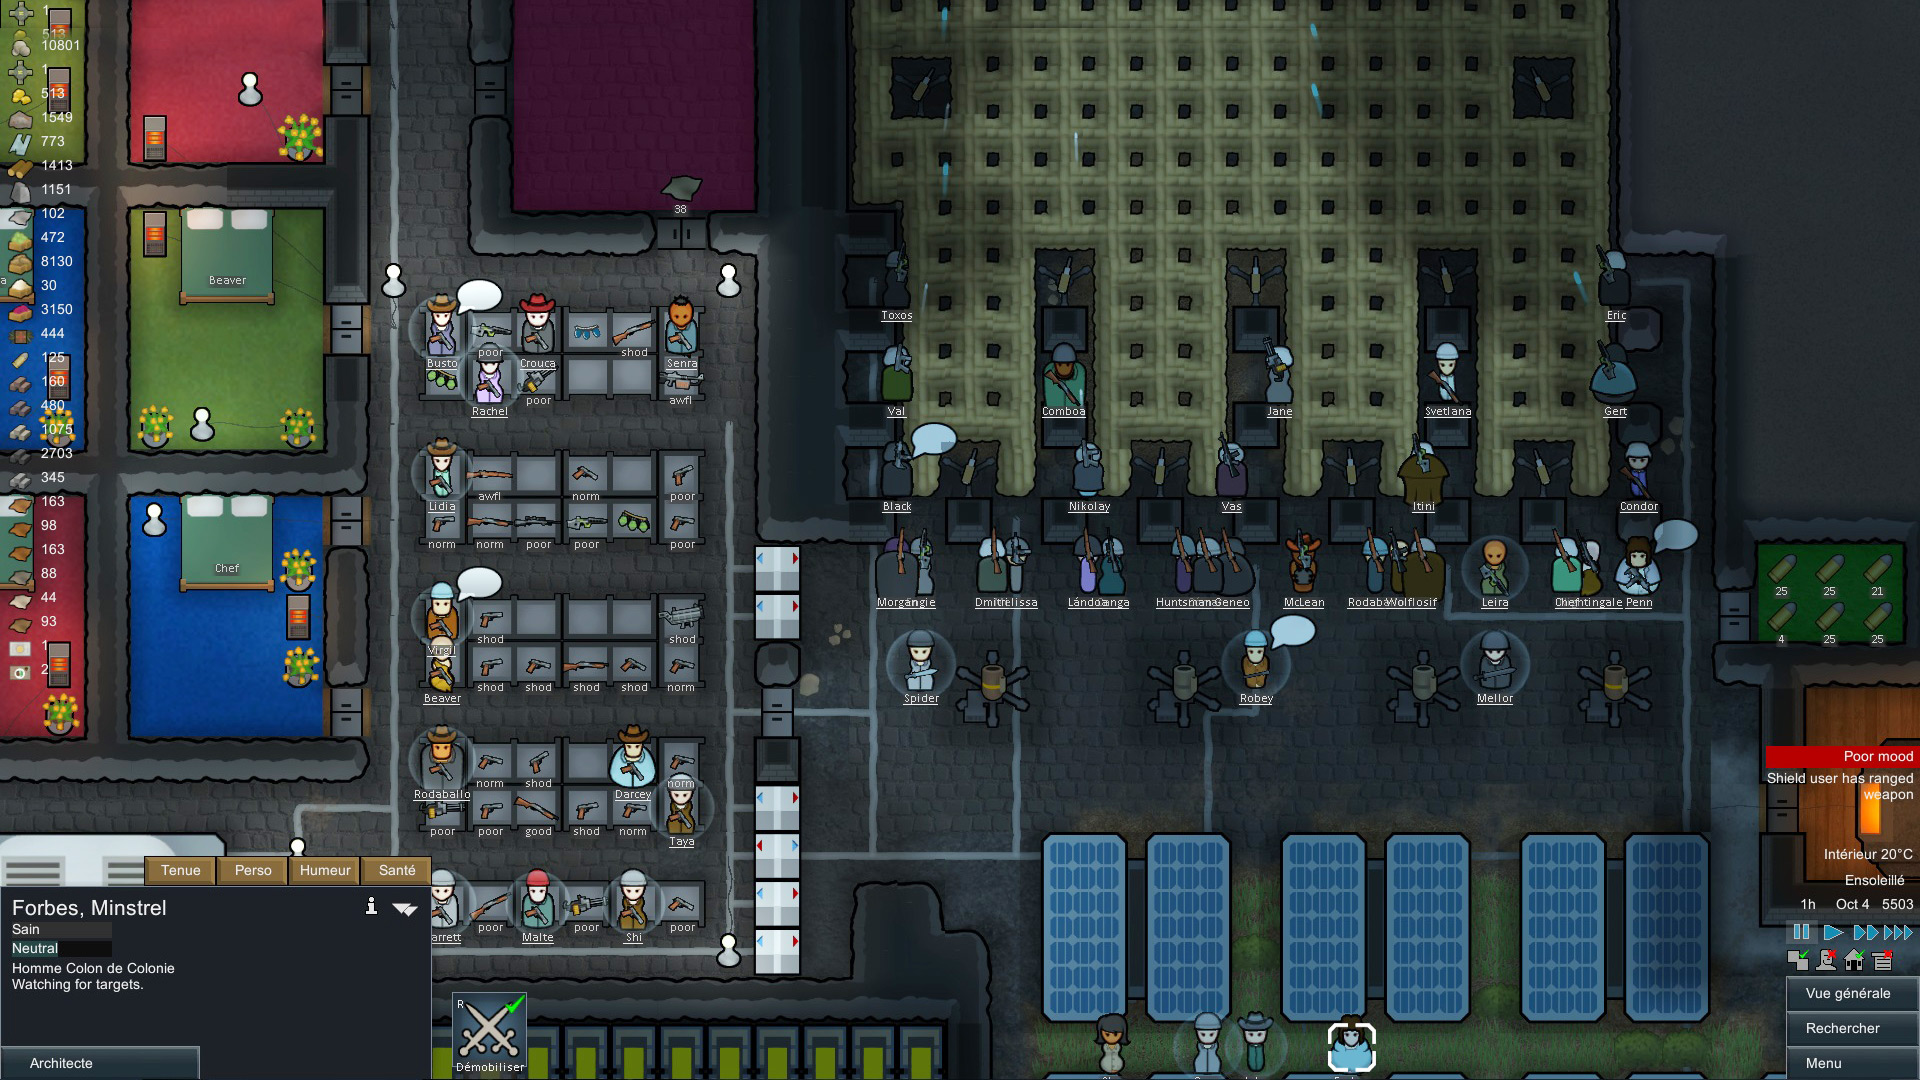 RimWorld - A colony in progress, powered by solar panels. Colonists move through the settlement, which is made up of a bedroom, armories, and other useful rooms for space survival.